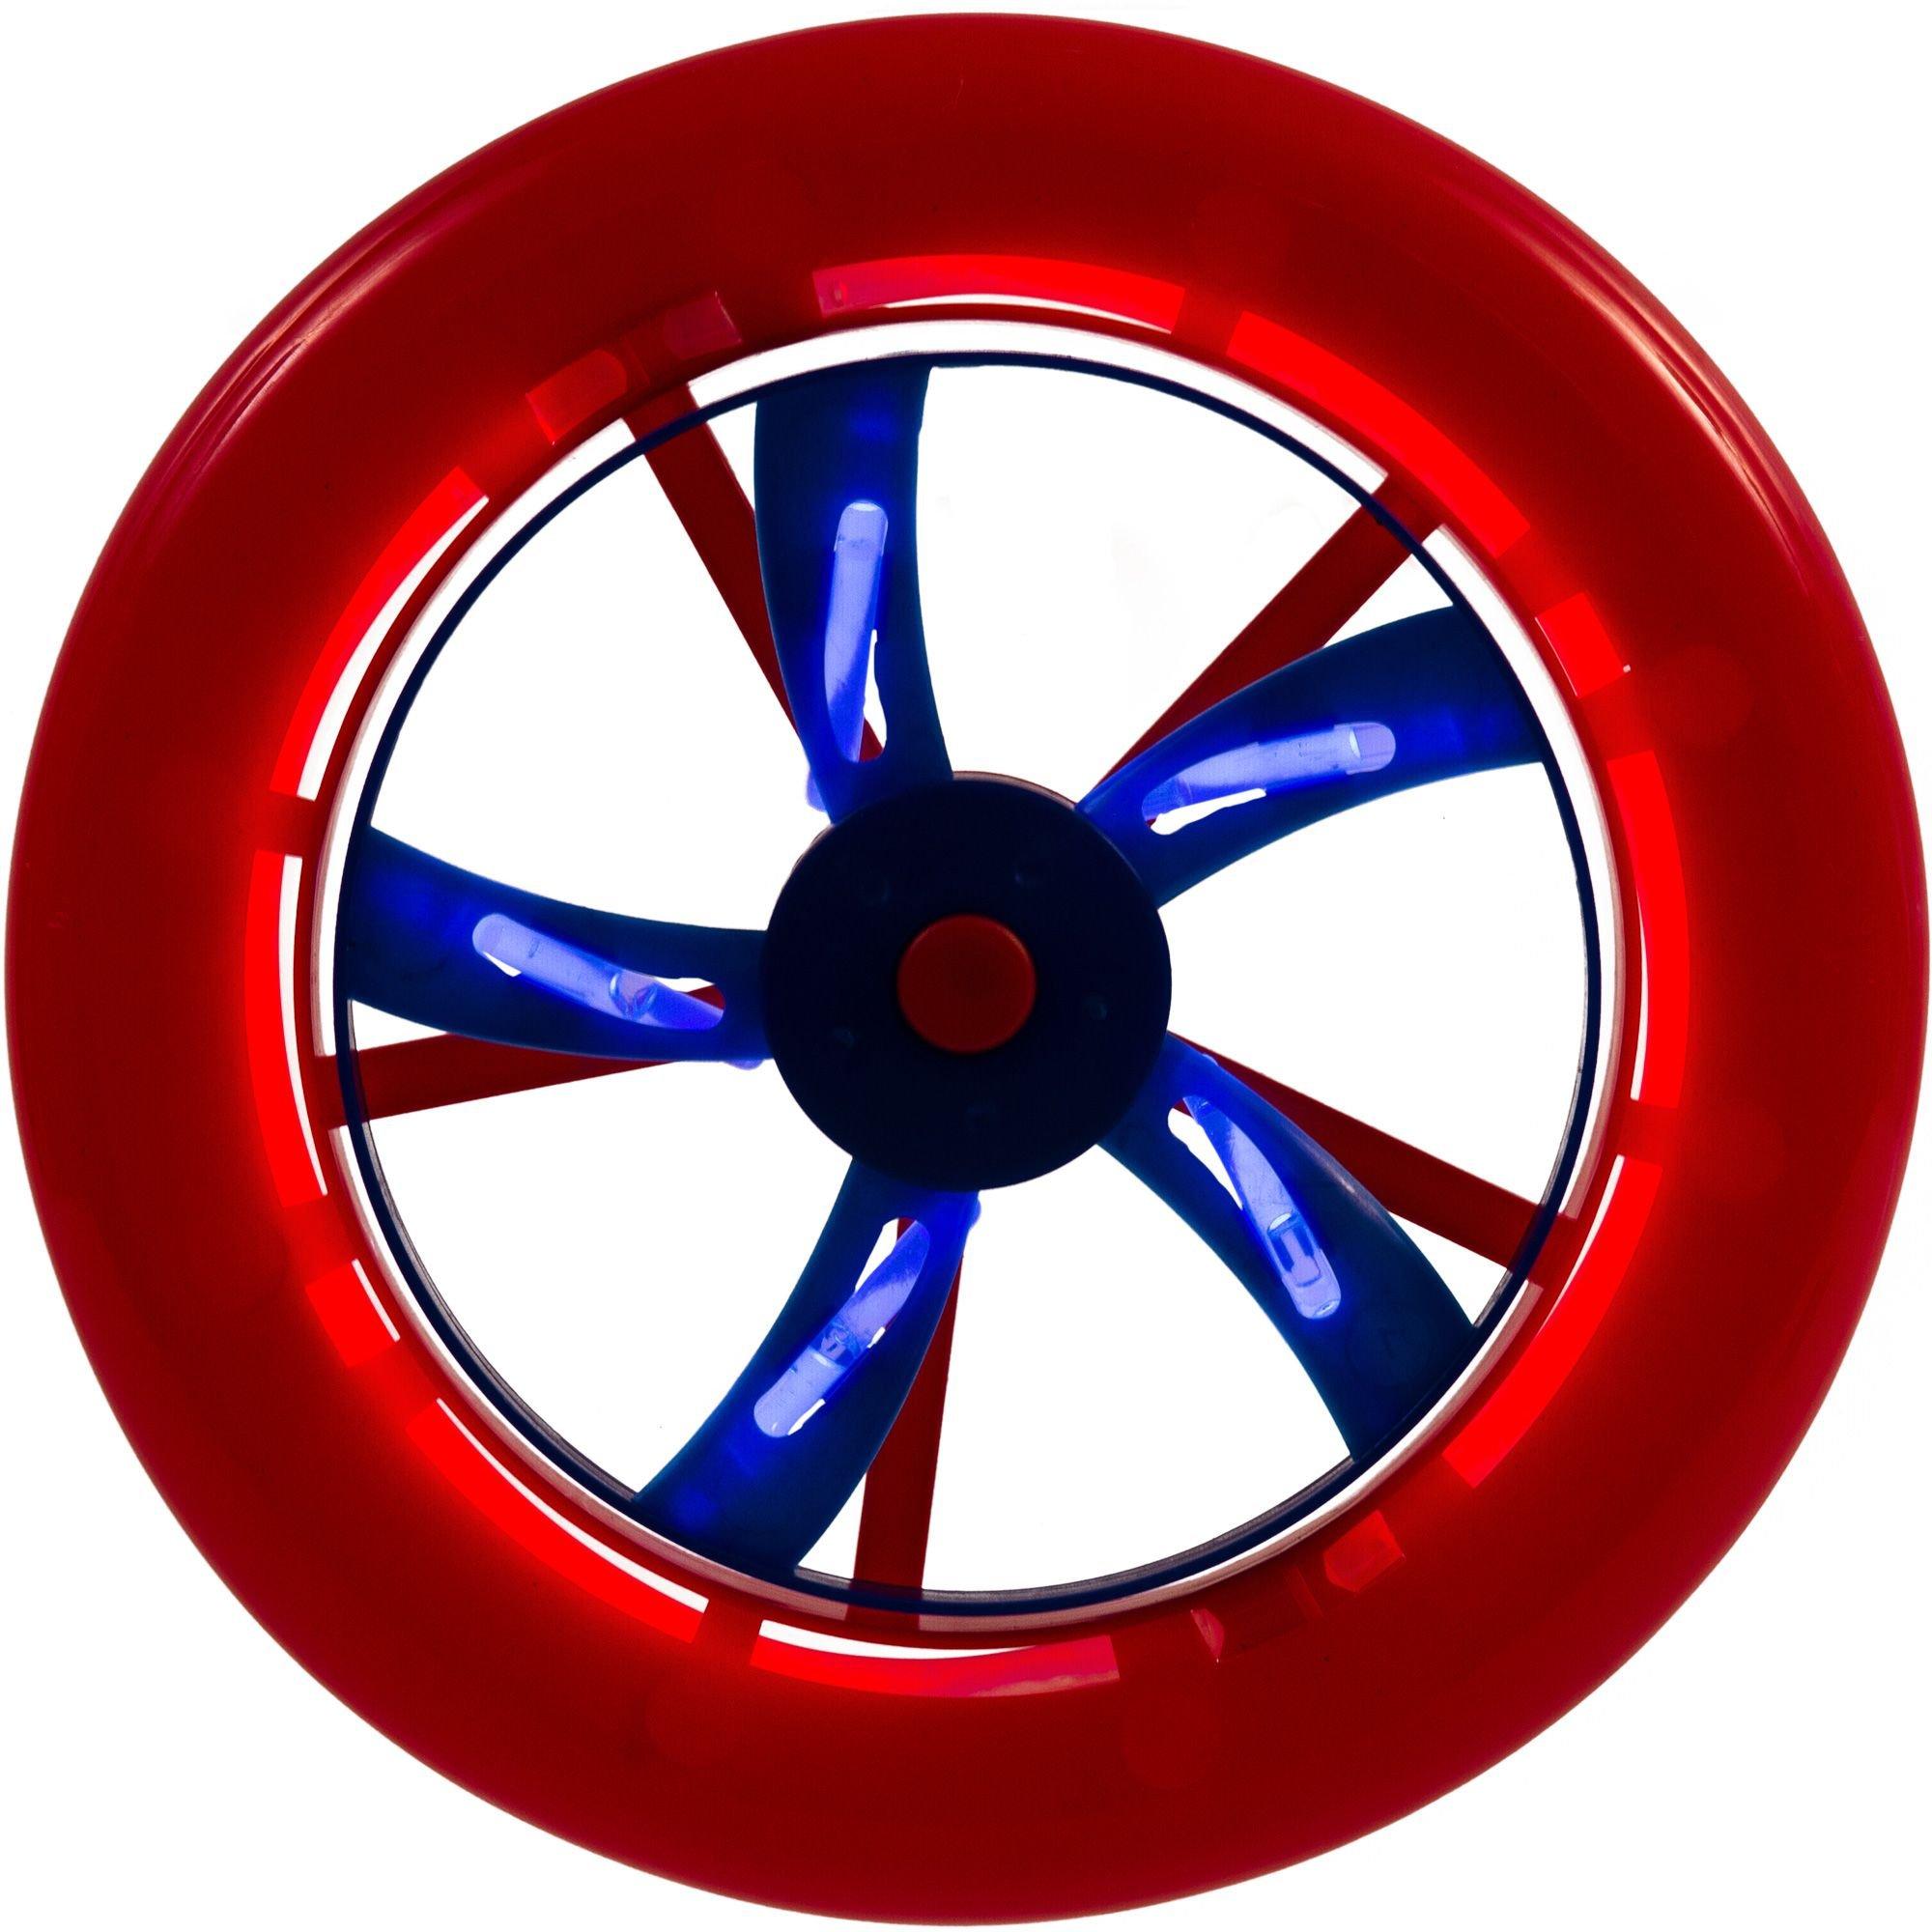 Patriotic Red, White & Blue Glow Stick Flying Disc